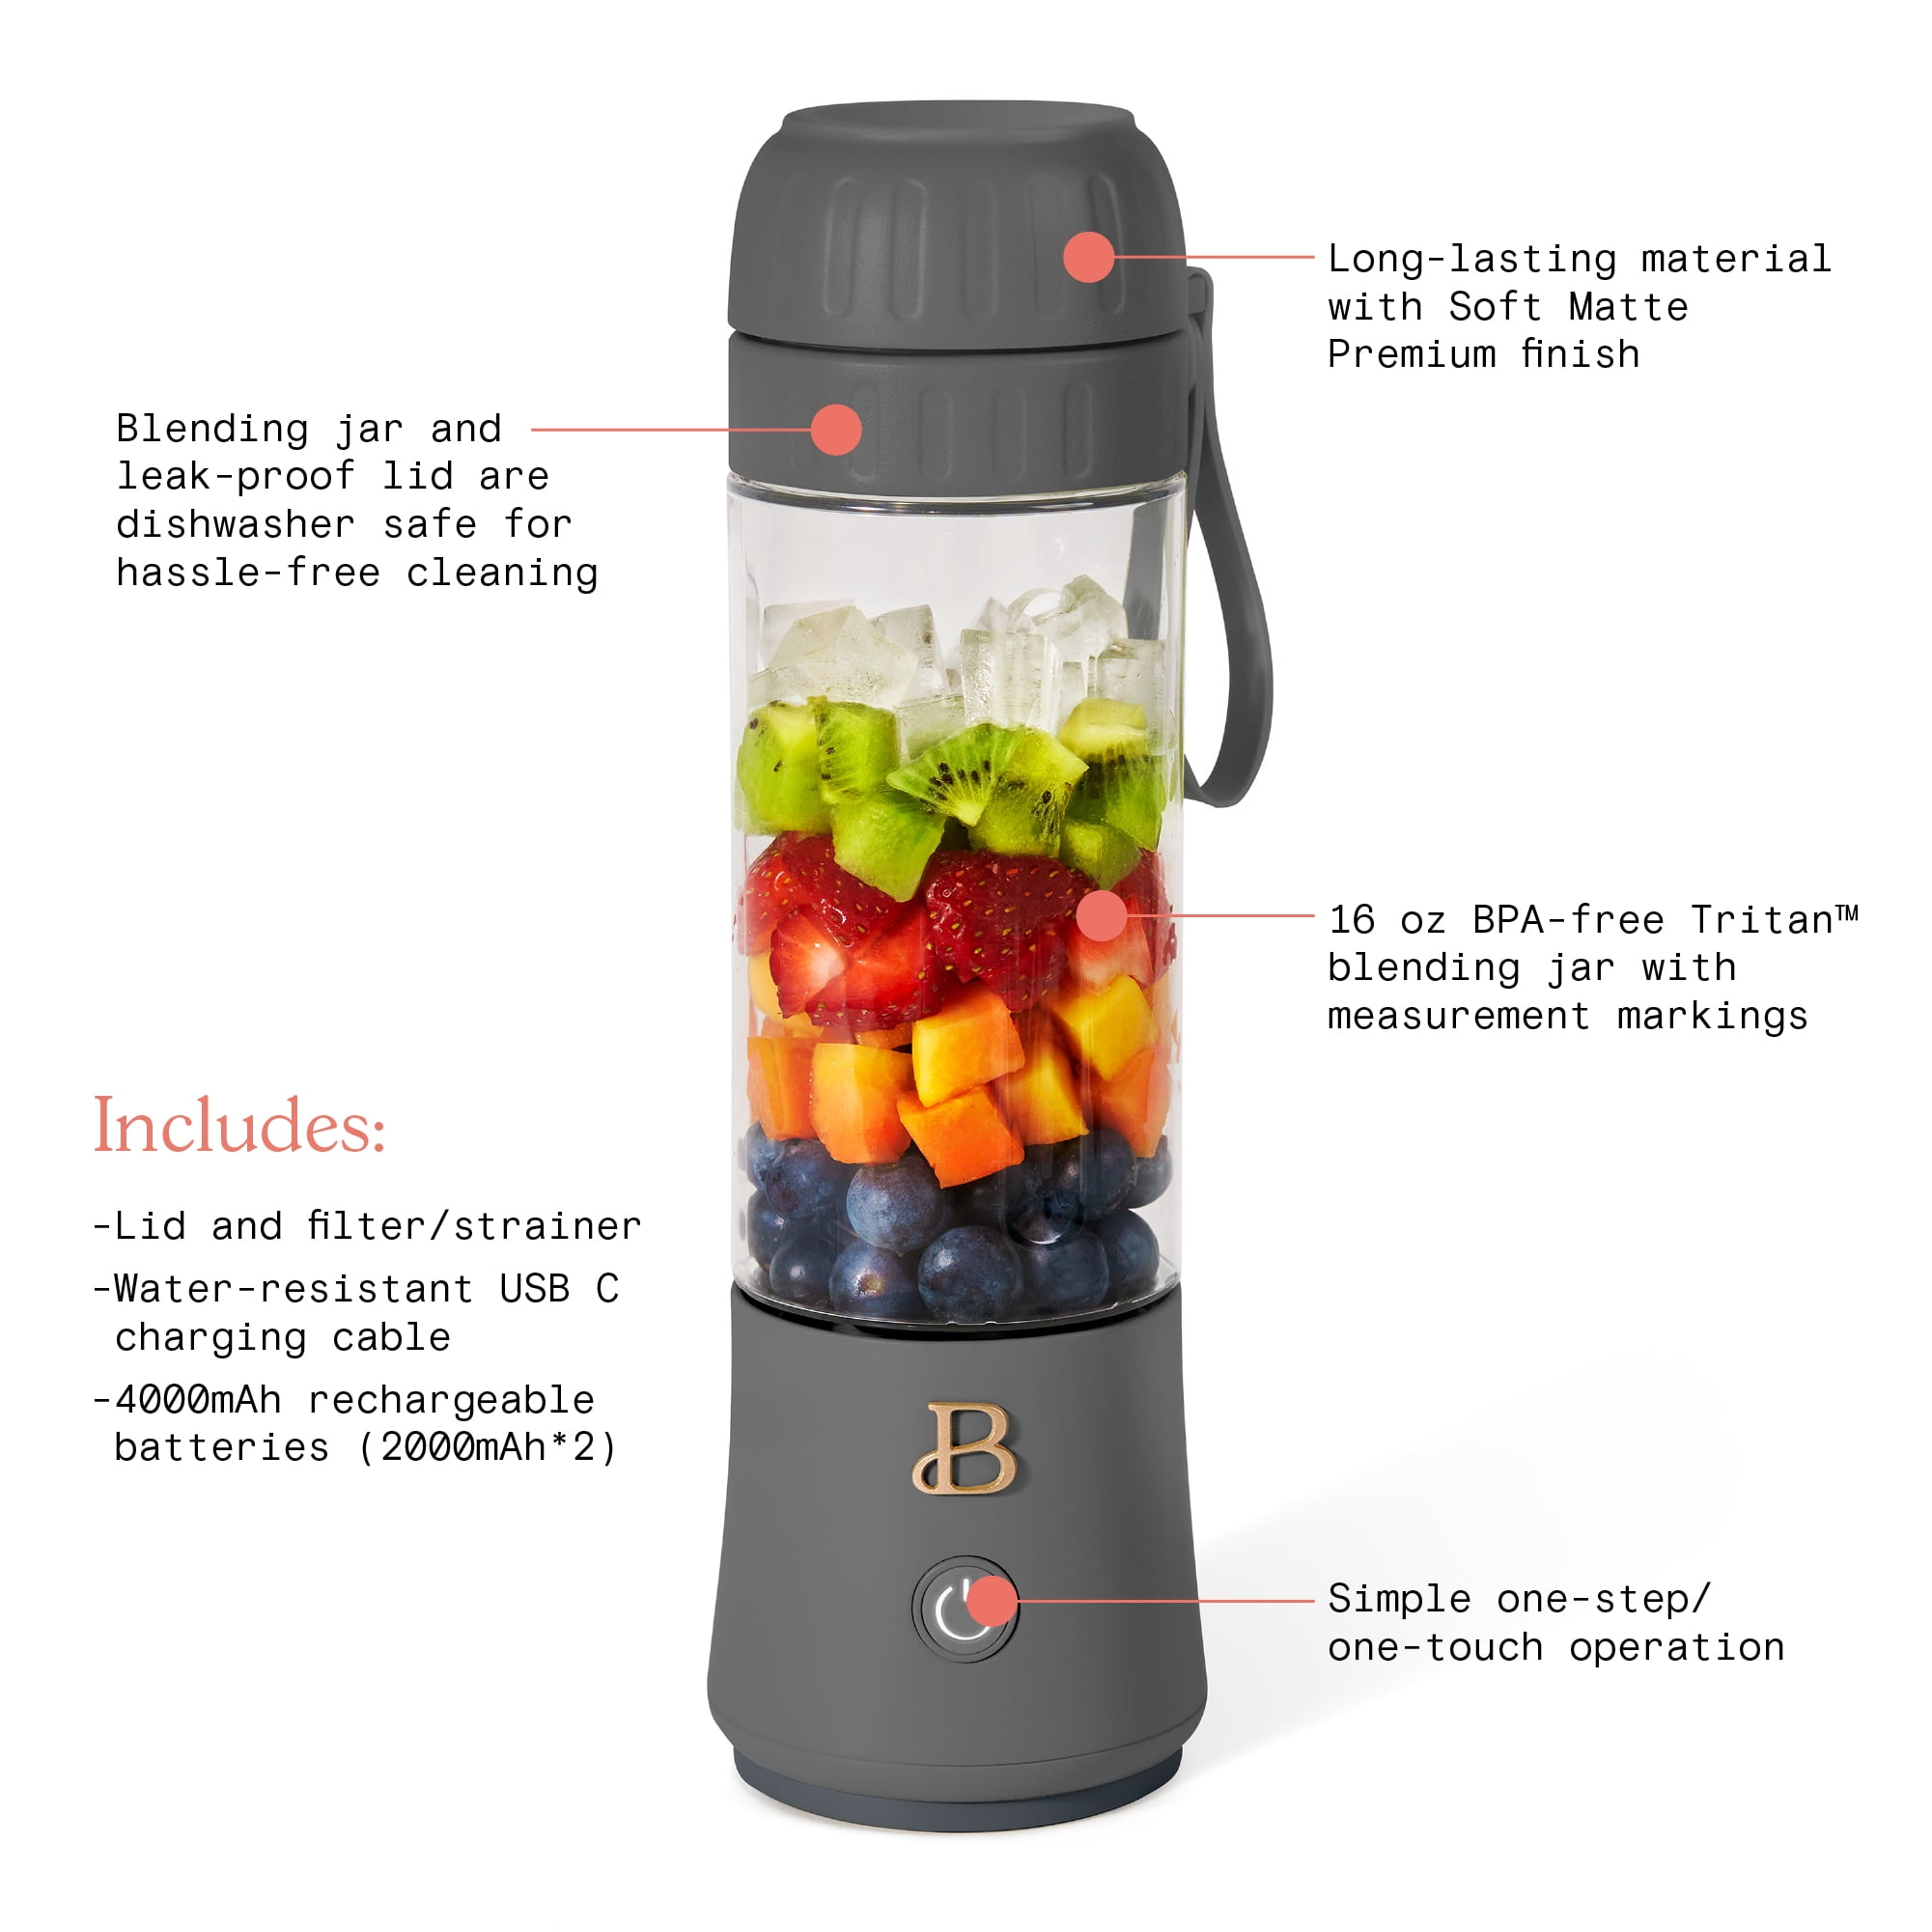 Portable blender with a unique mason jar-inspired design will